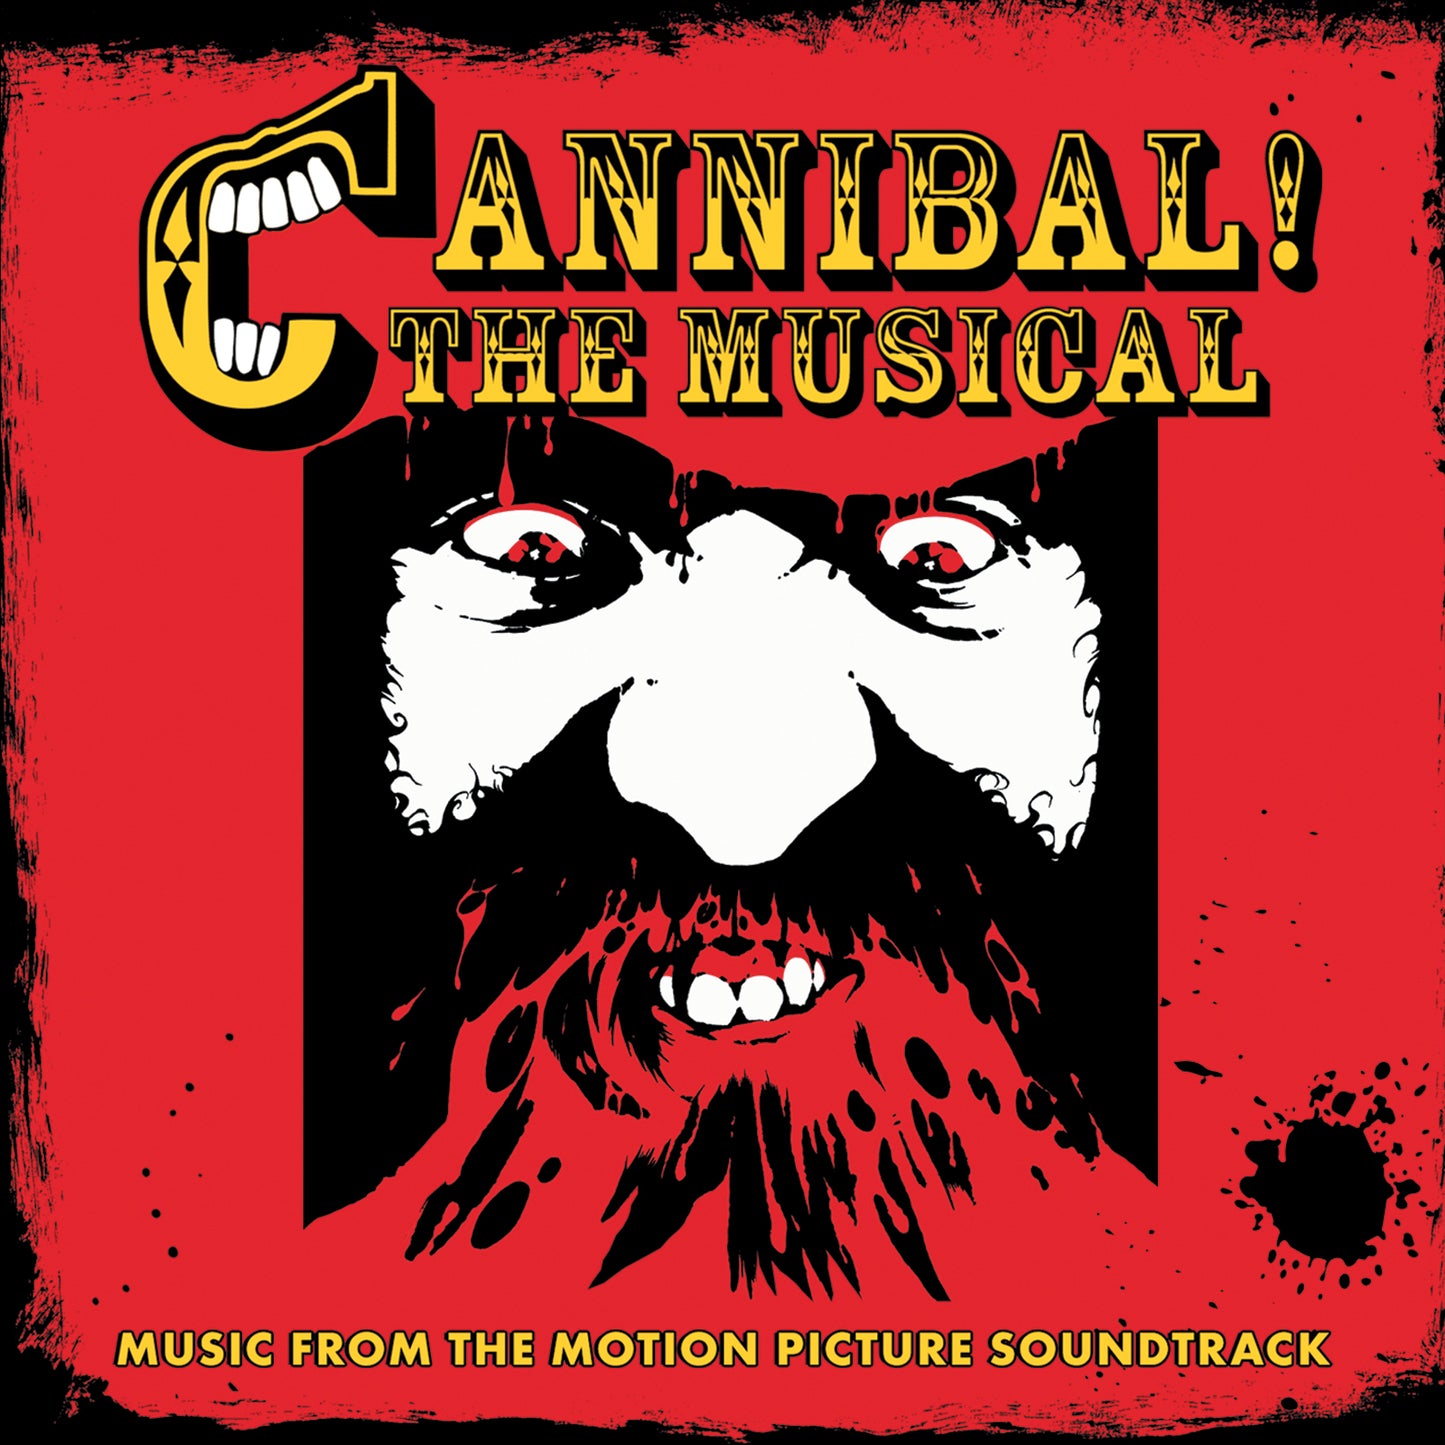 Cannibal! The Musical [Music From the Motion Picture Soundtrack]